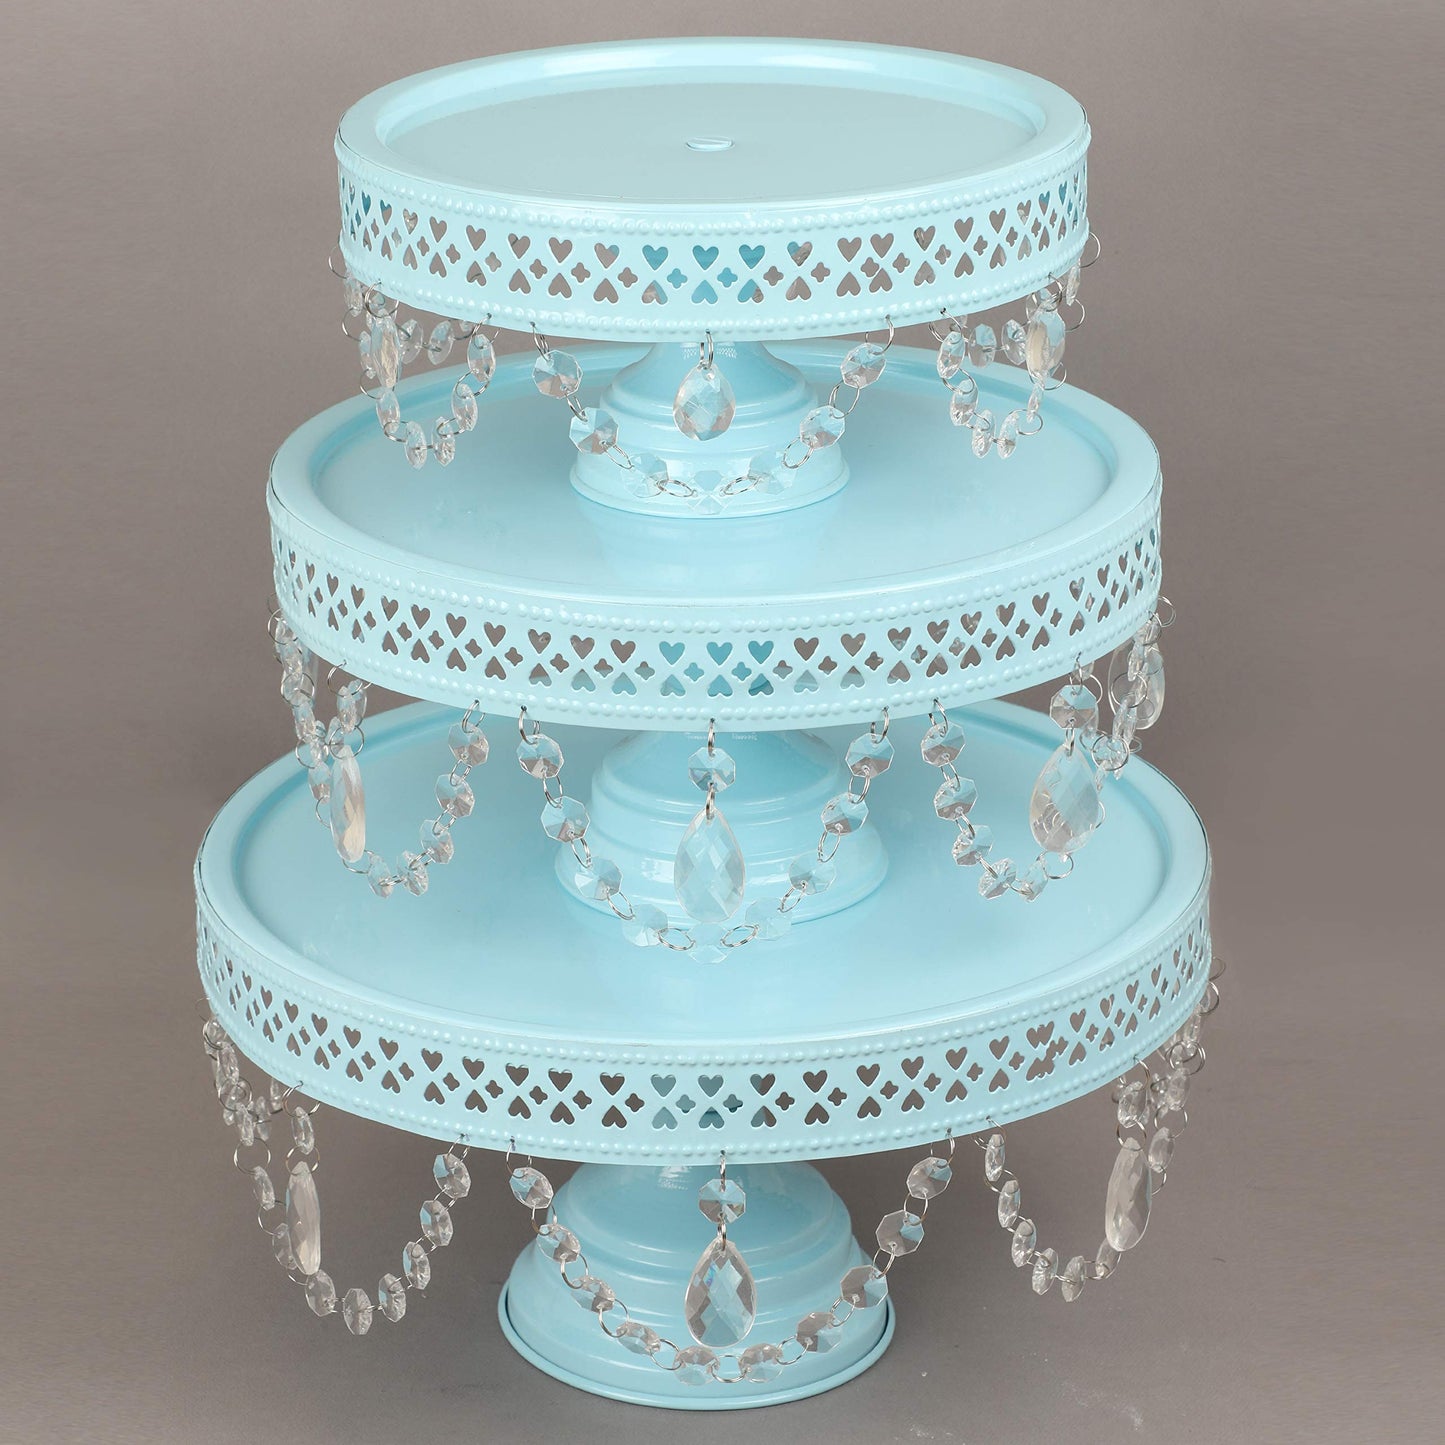 GiftBay Creations - Cake Stand Pedestal Round Strong Metal with Clear Hanging Crystals Set/3 (9-Inch, 11-Inch, 13-Inch, Sky Blue)